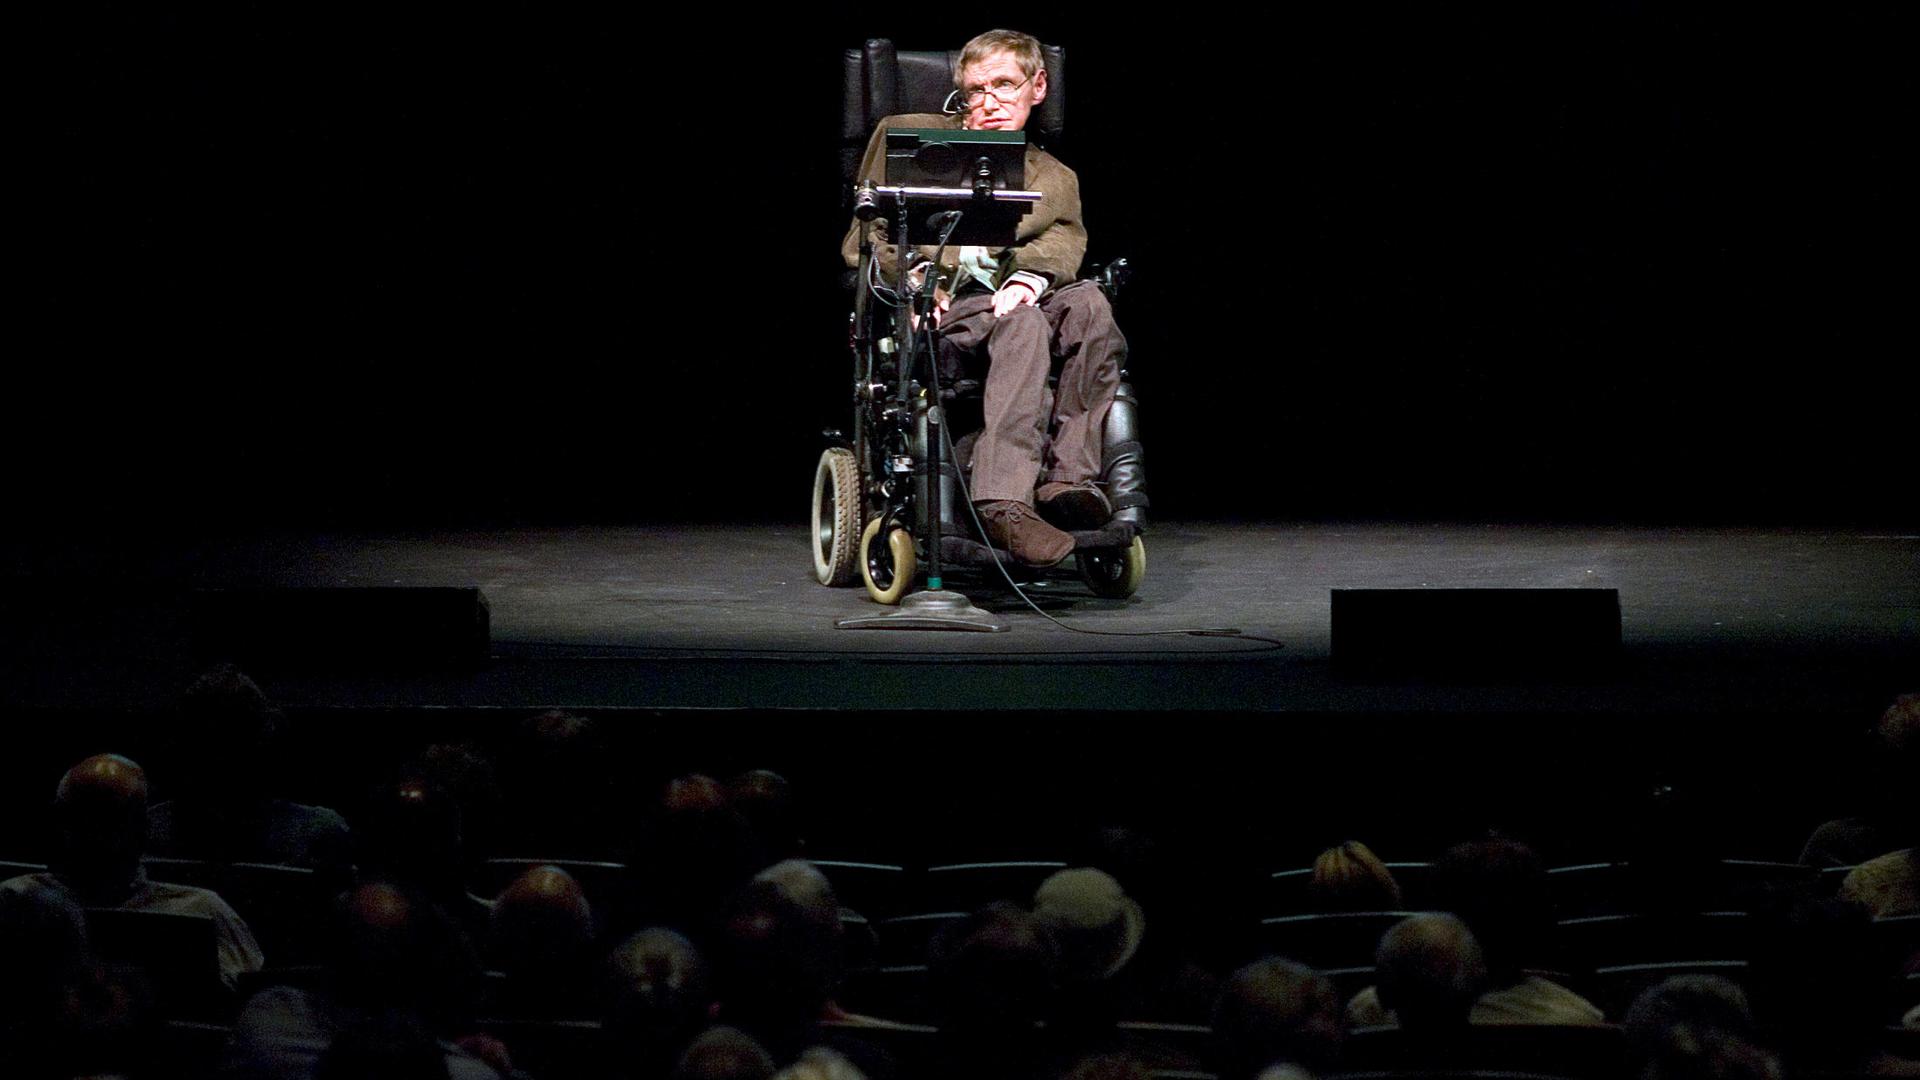 Stephen Hawking onstage discussing theories on the origin of the universe in a talk in Berkeley, California, 2007.